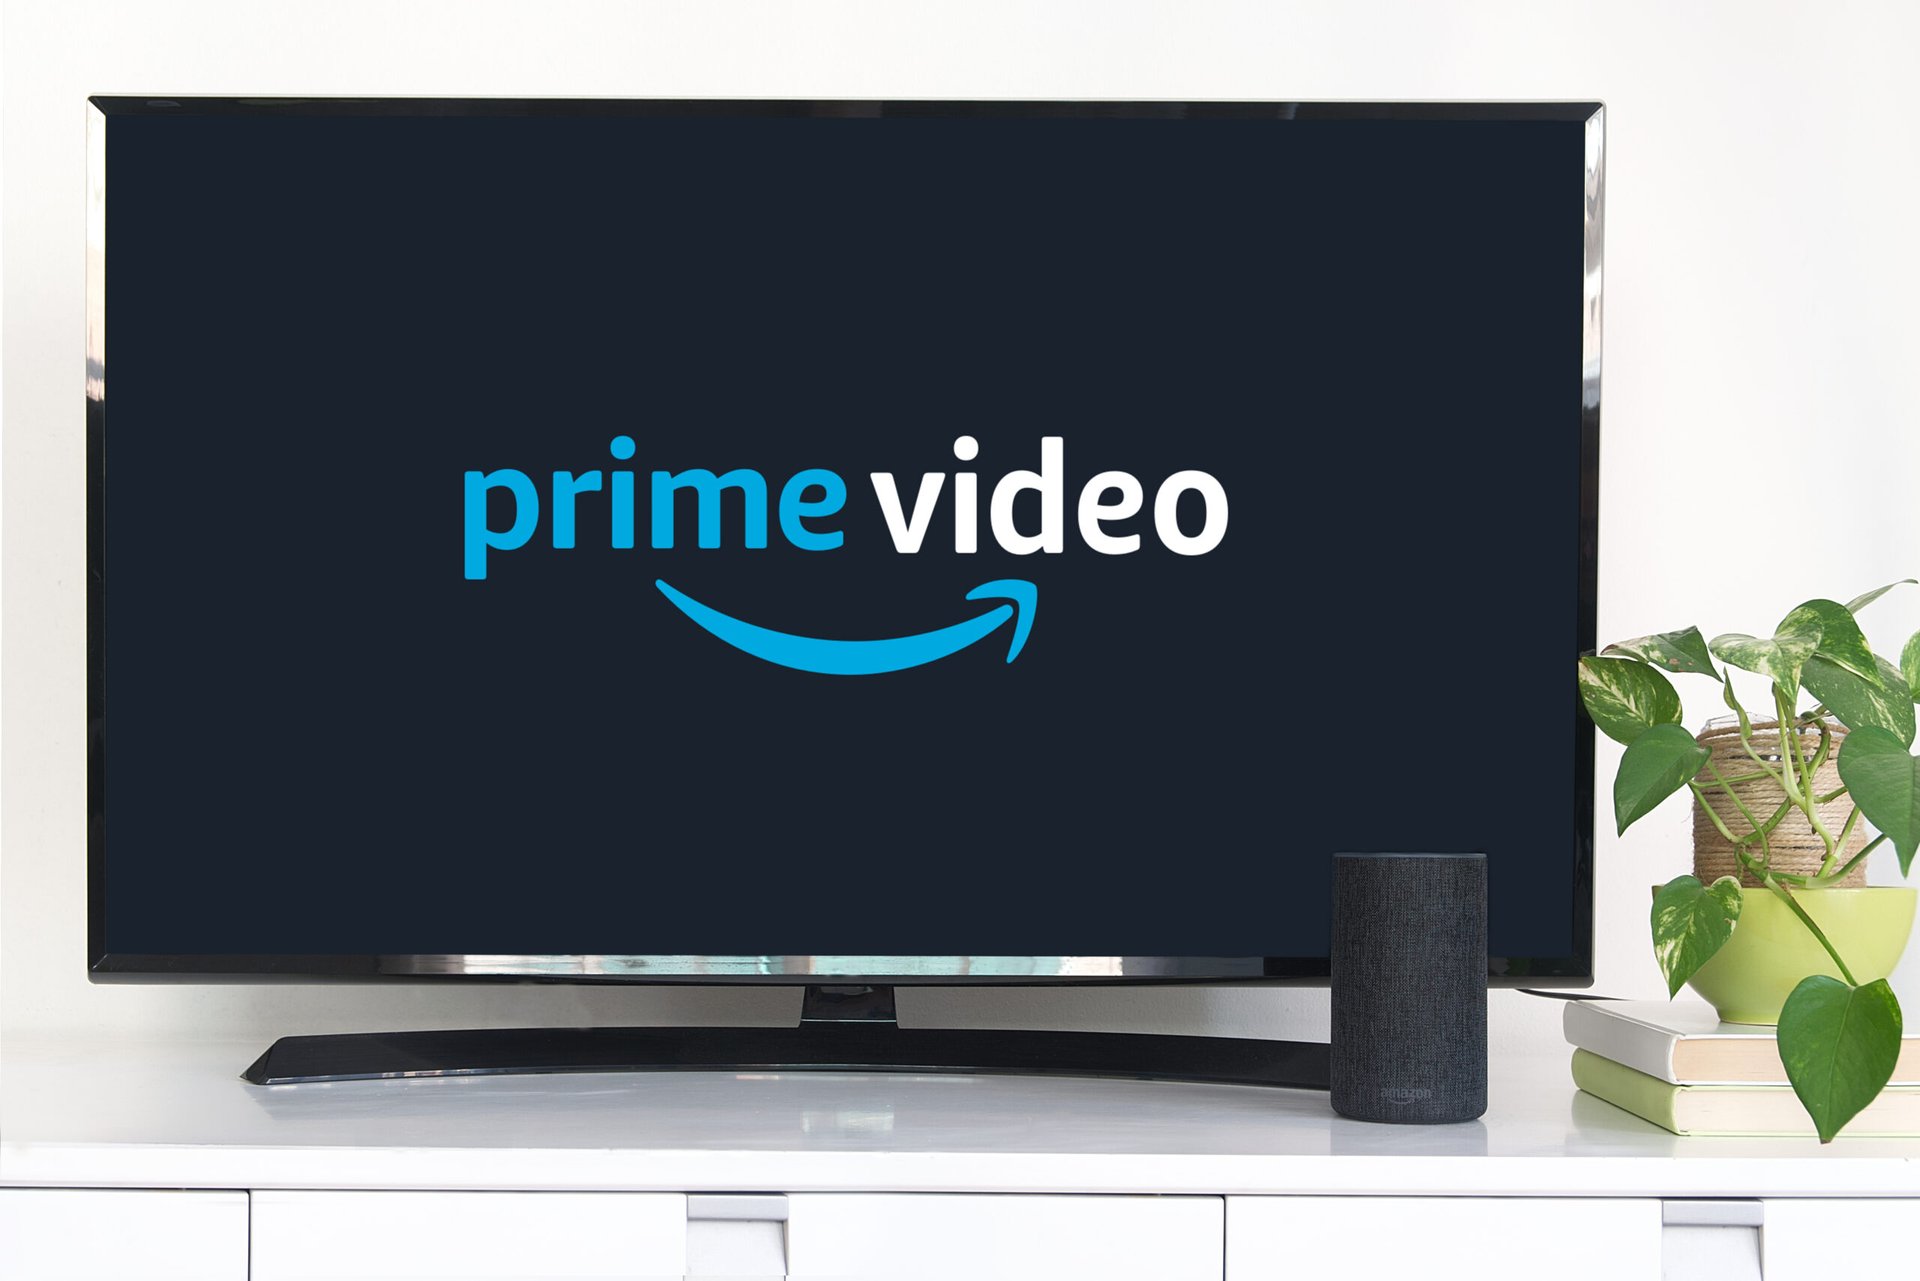 Amazon Prime Video on a TV